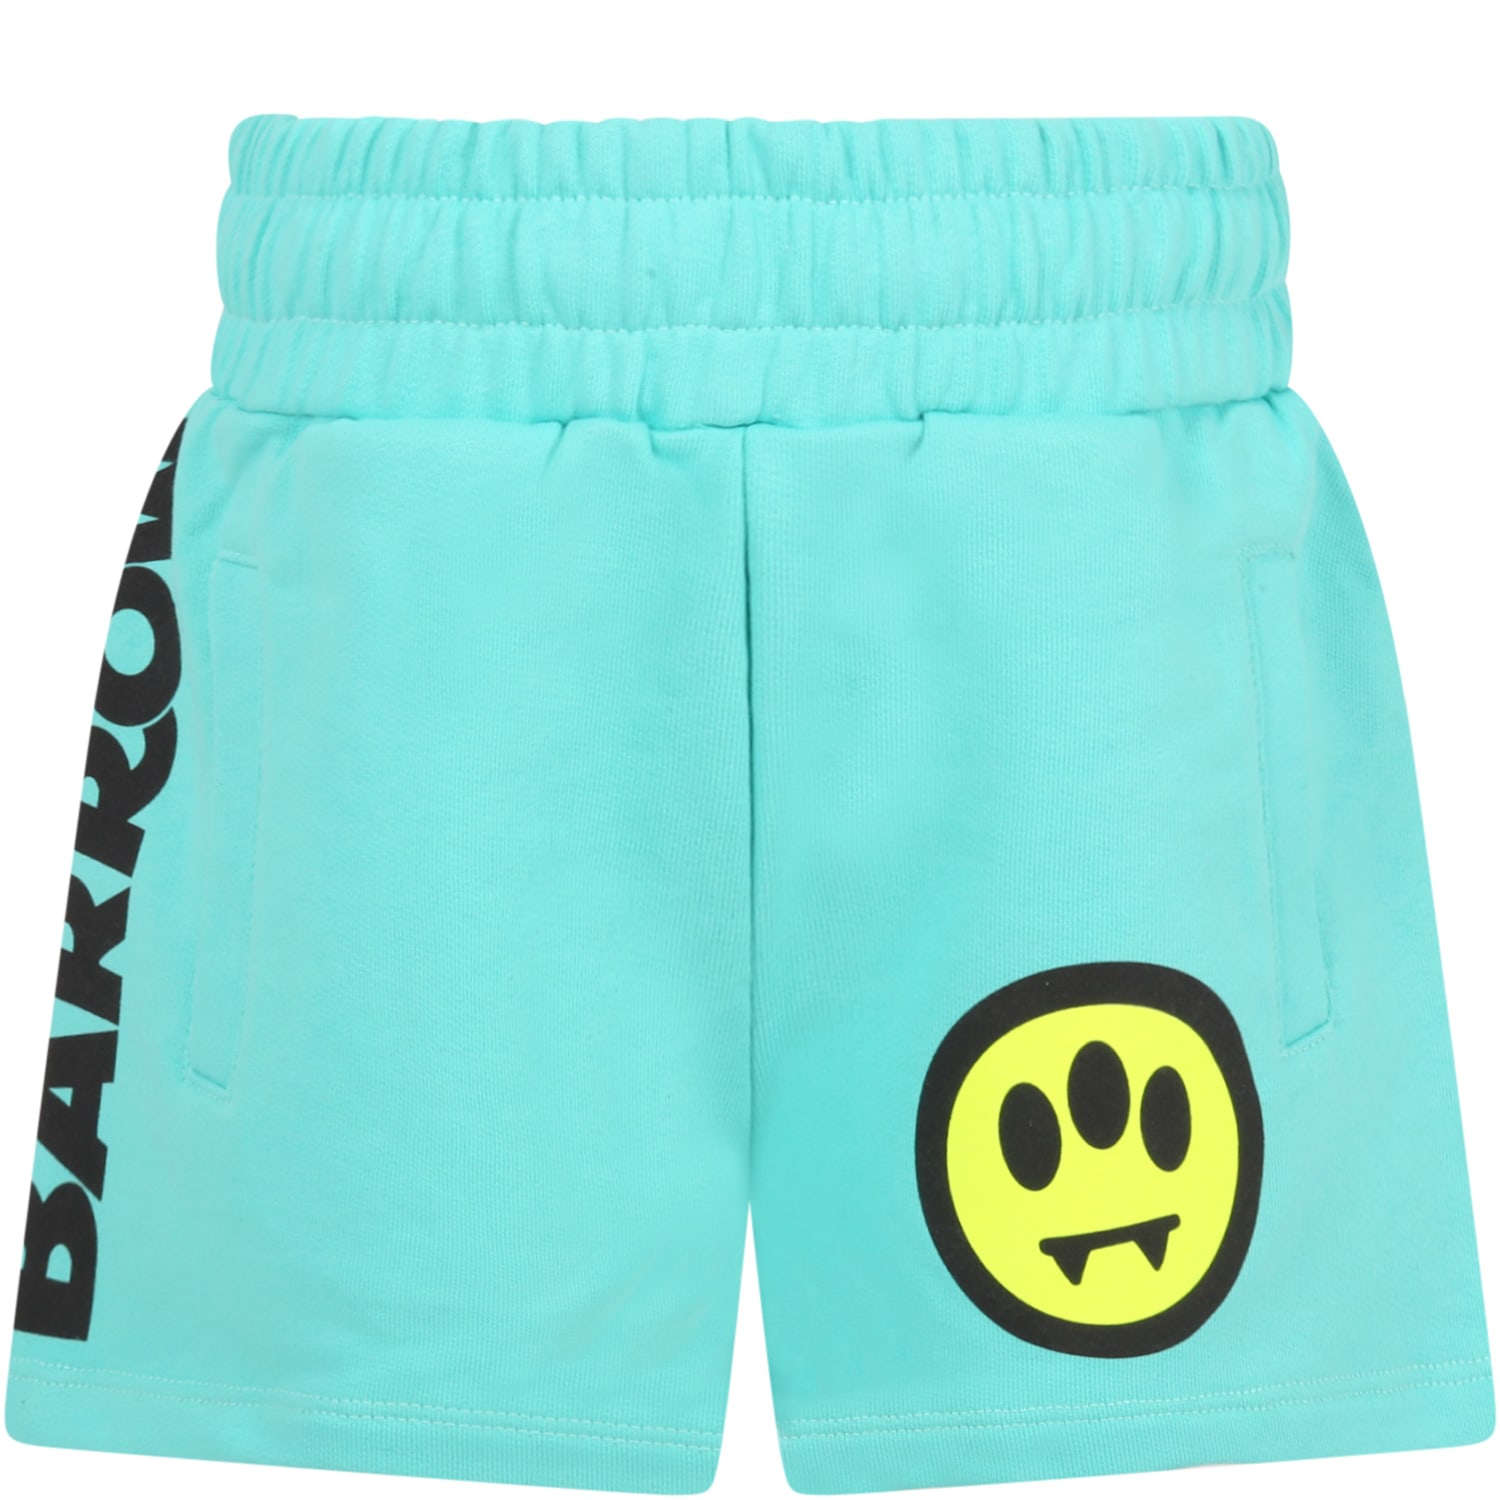 Barrow Teal Green Short For Girl With Smile